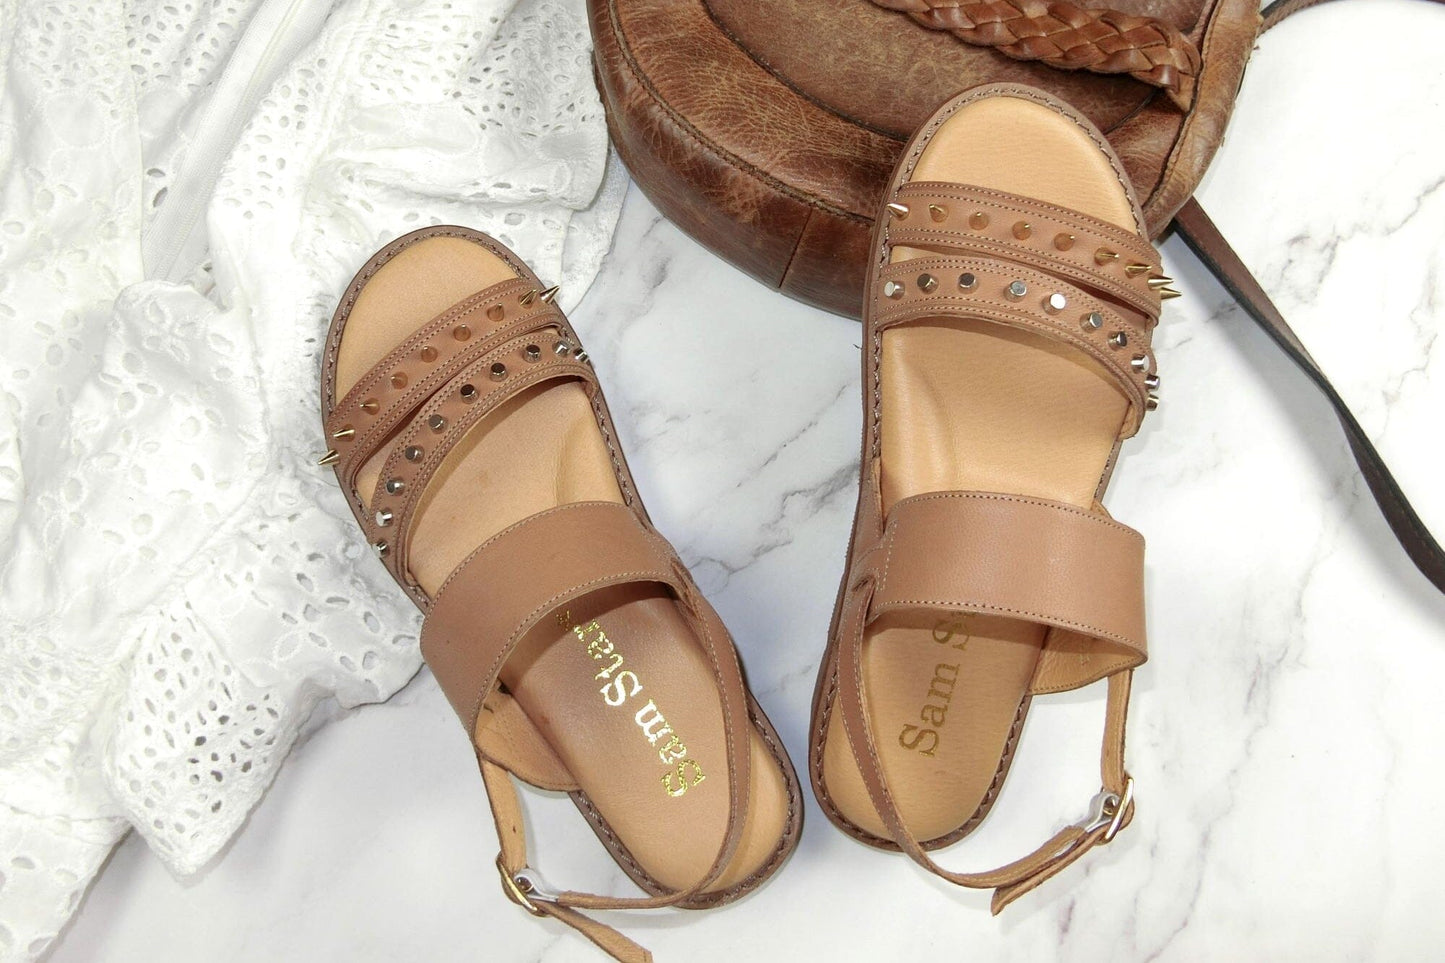 SS22018/19 Leather flat sandals with studs detail Sam Star Shoes Brown 6 (39) 